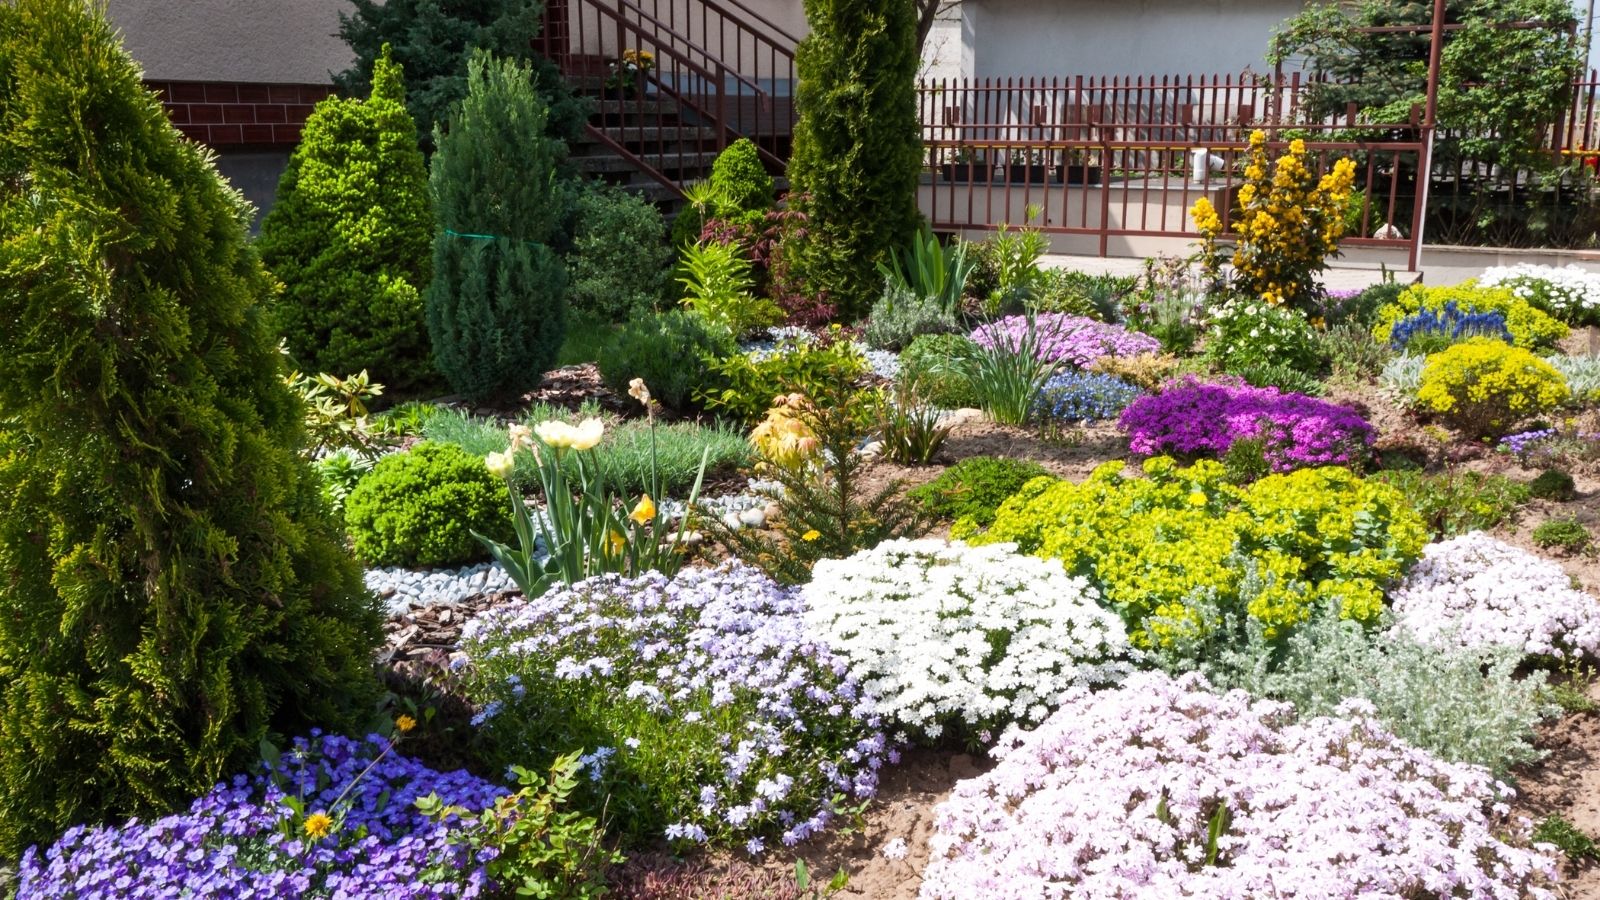 From Flowers to Fences: Tips for Landscaping Your Front Yard
